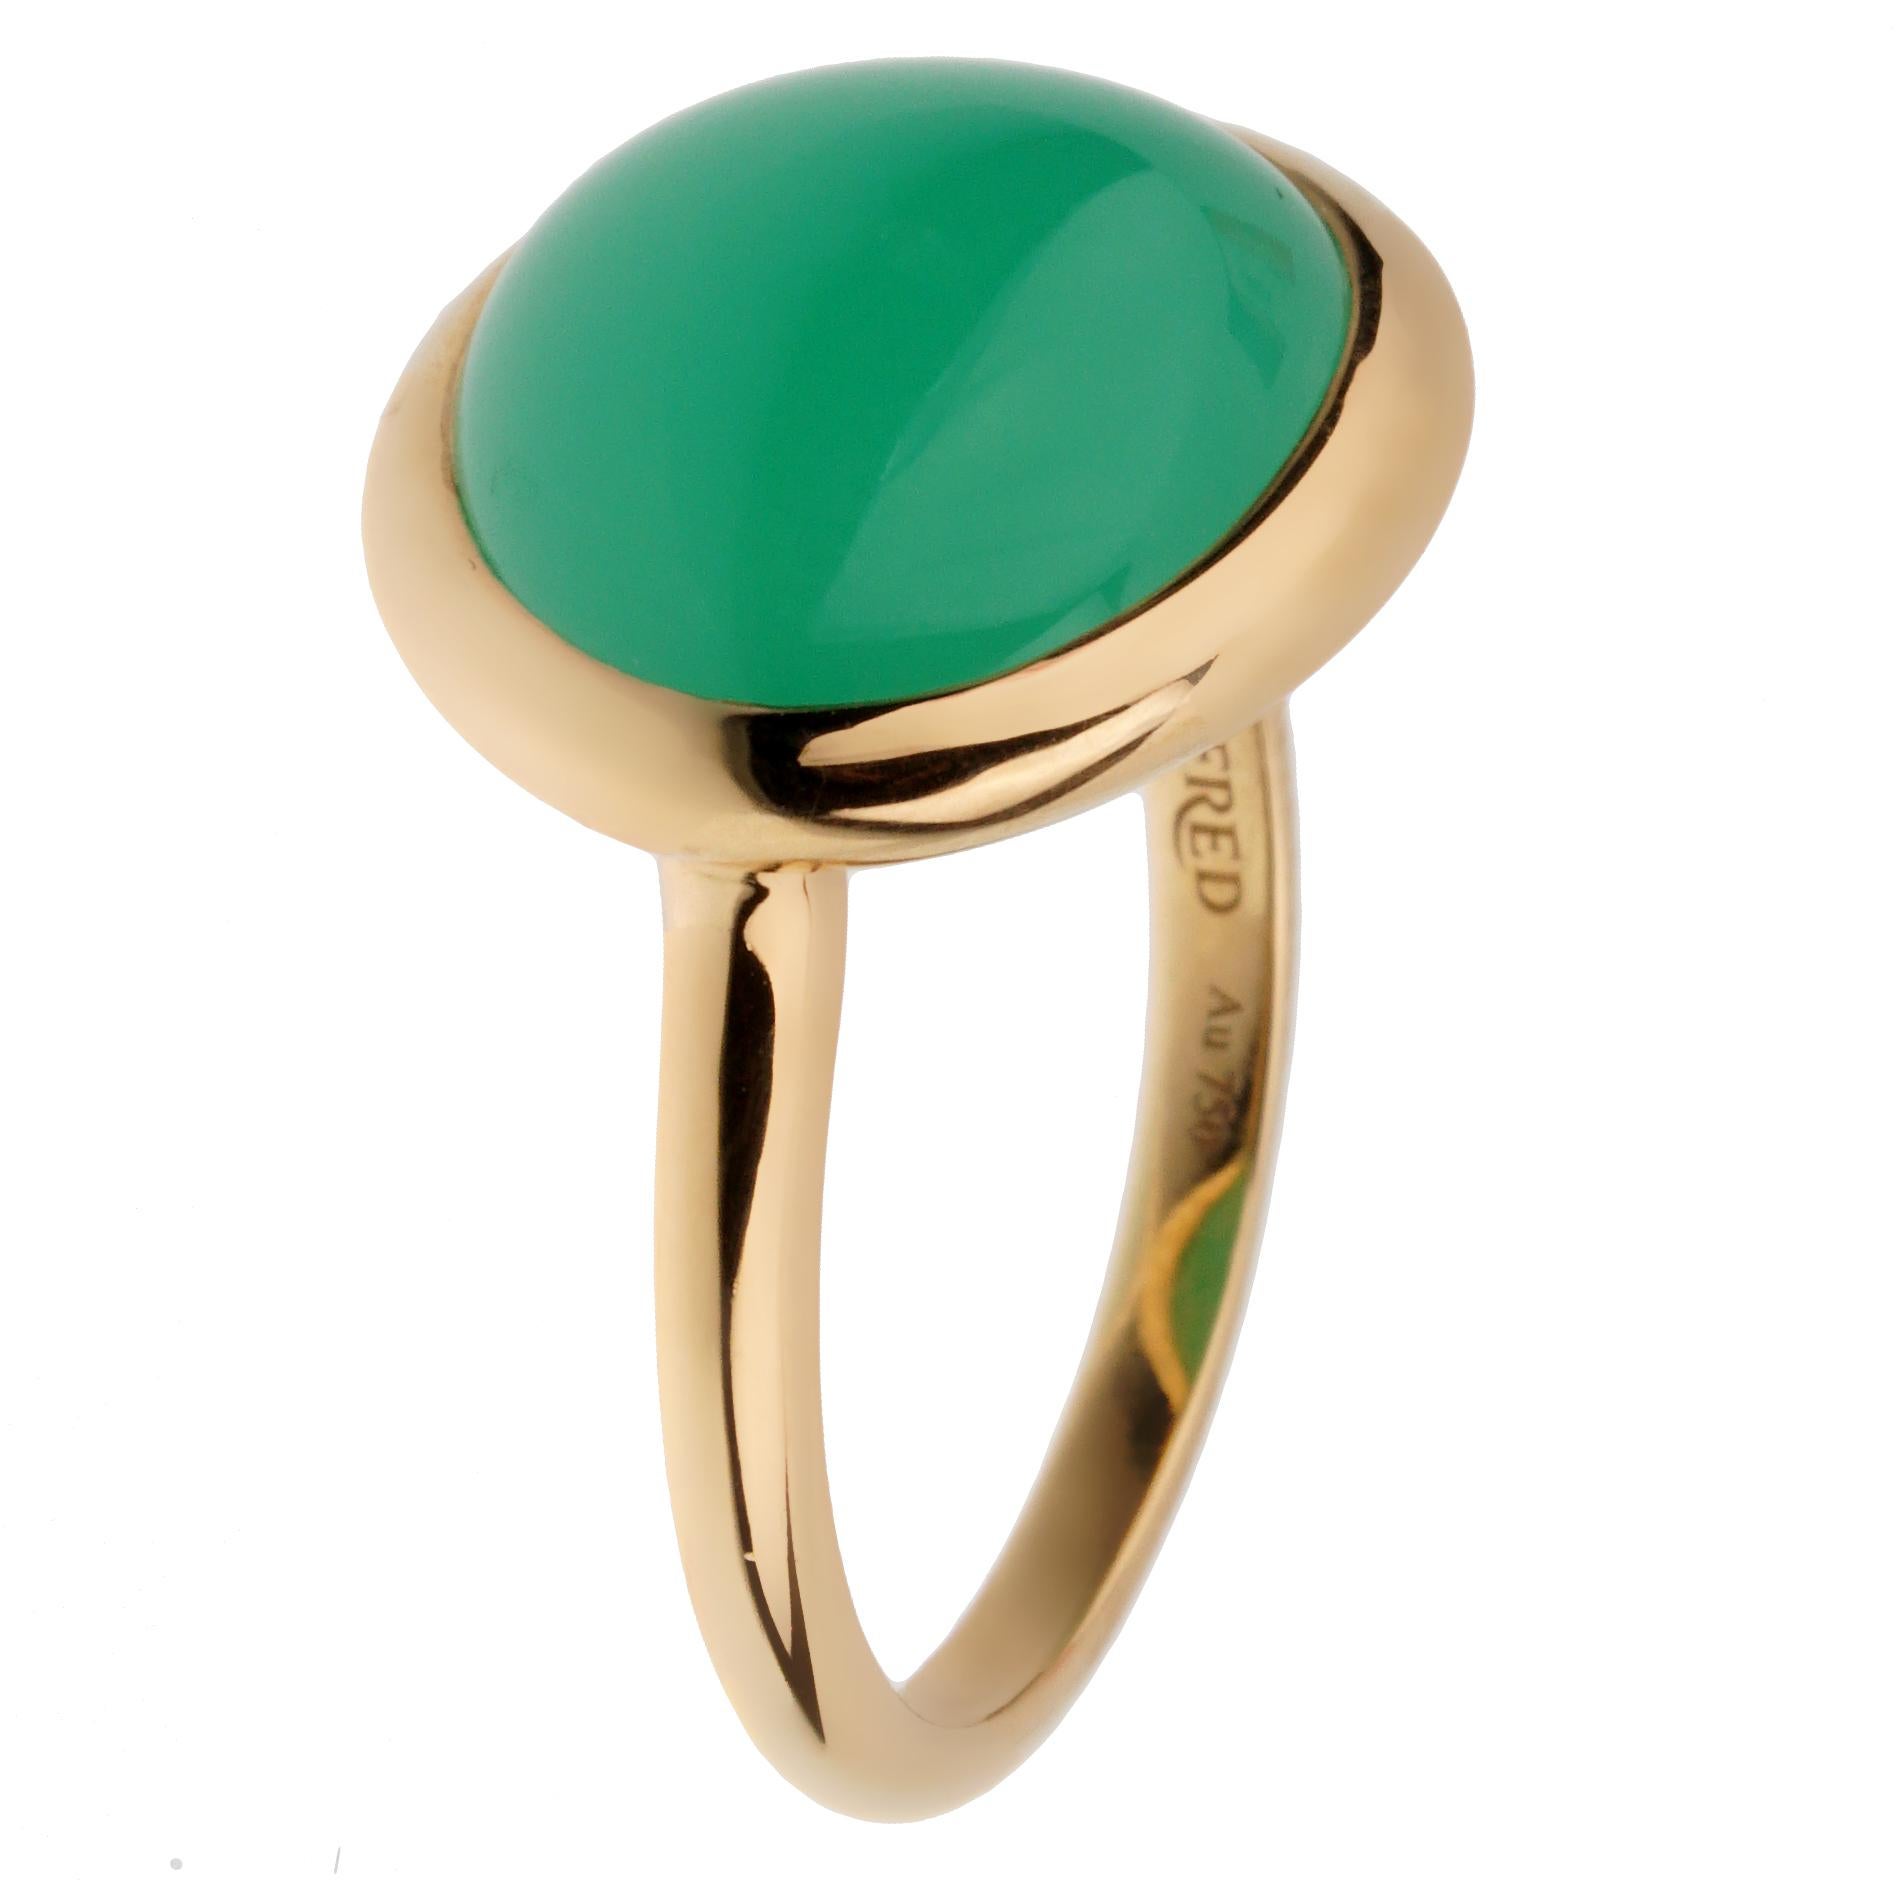 Fred of Paris 7ct Chrysophase Cabochon Yellow Gold Cocktail Ring In New Condition For Sale In Feasterville, PA